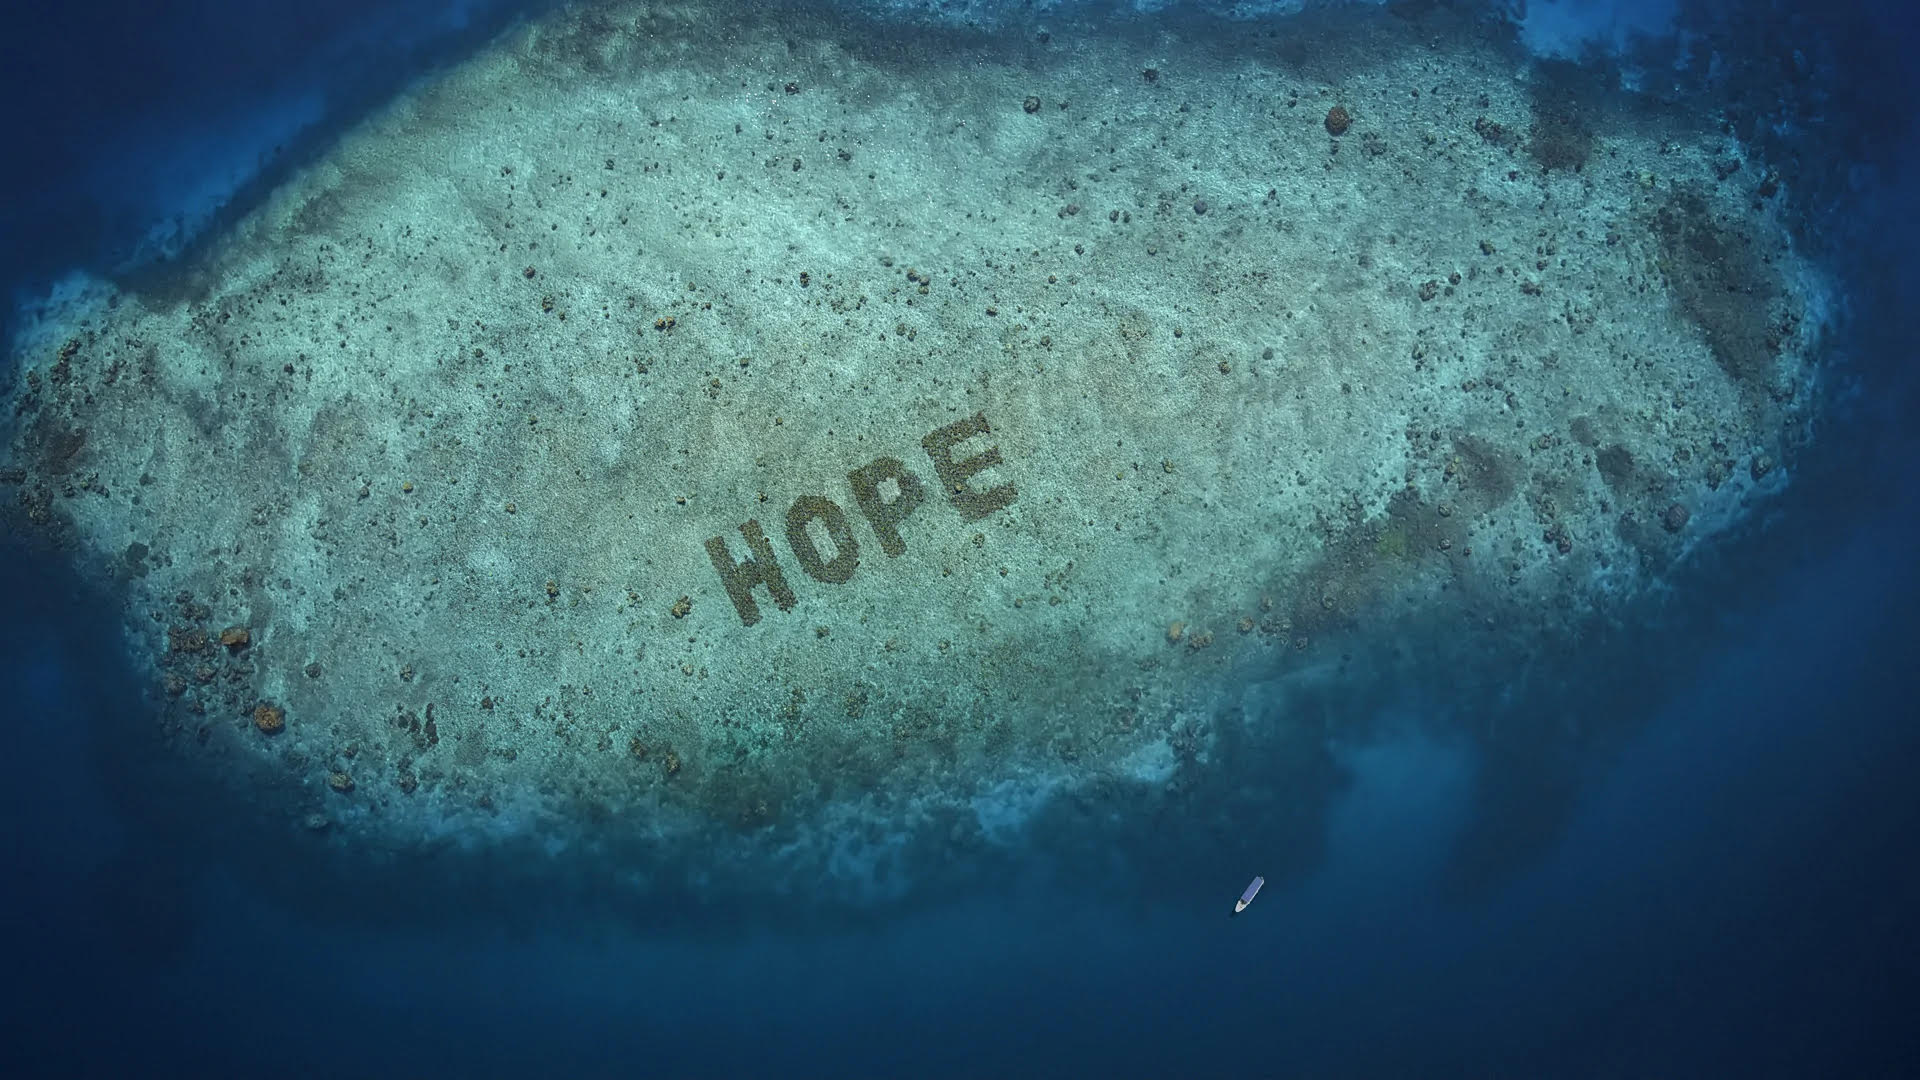 Hope Reef Sheba Coral Restoration Project by The Glue Society